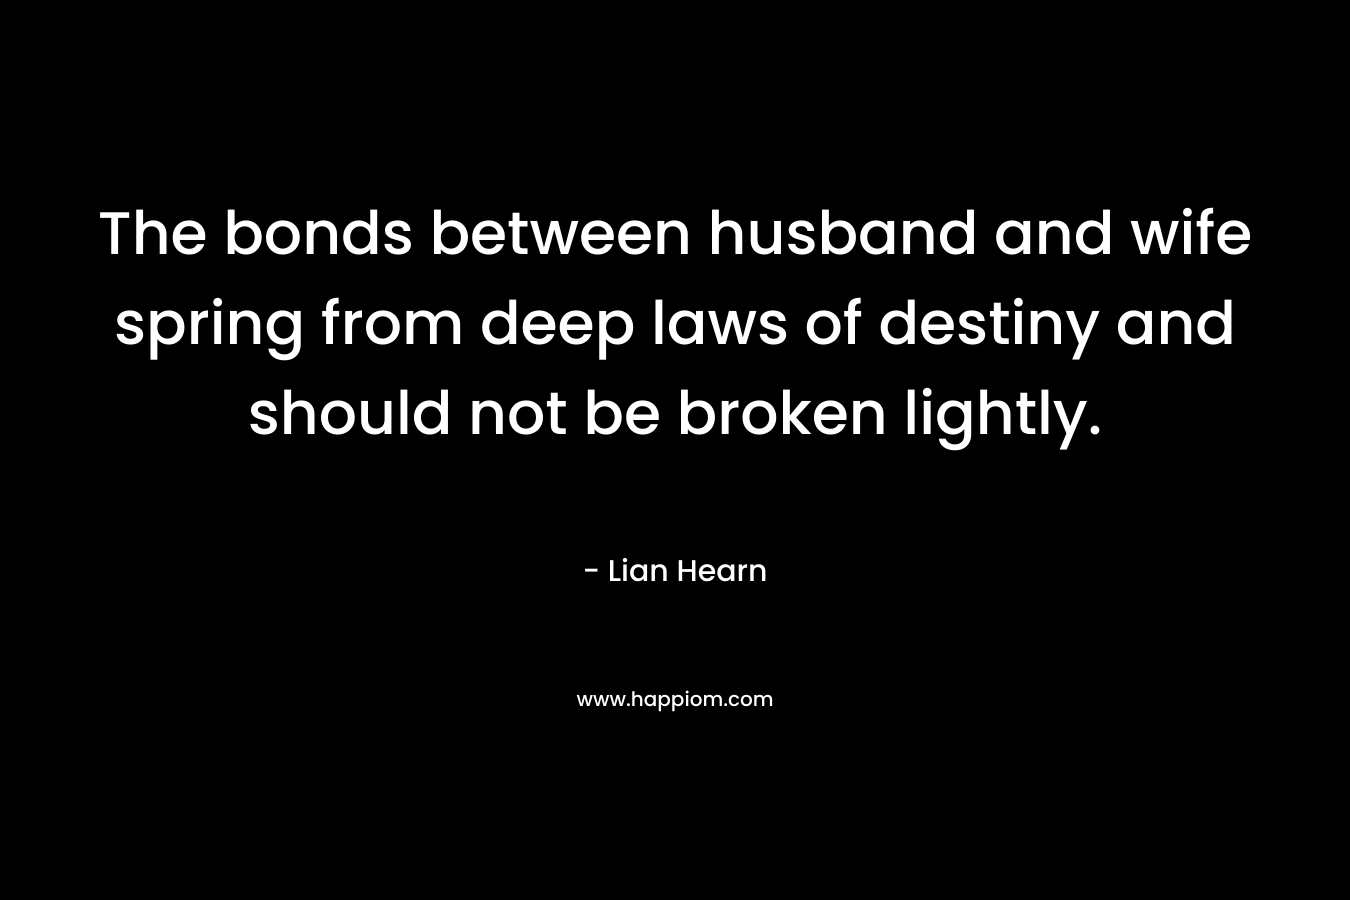 The bonds between husband and wife spring from deep laws of destiny and should not be broken lightly. – Lian Hearn